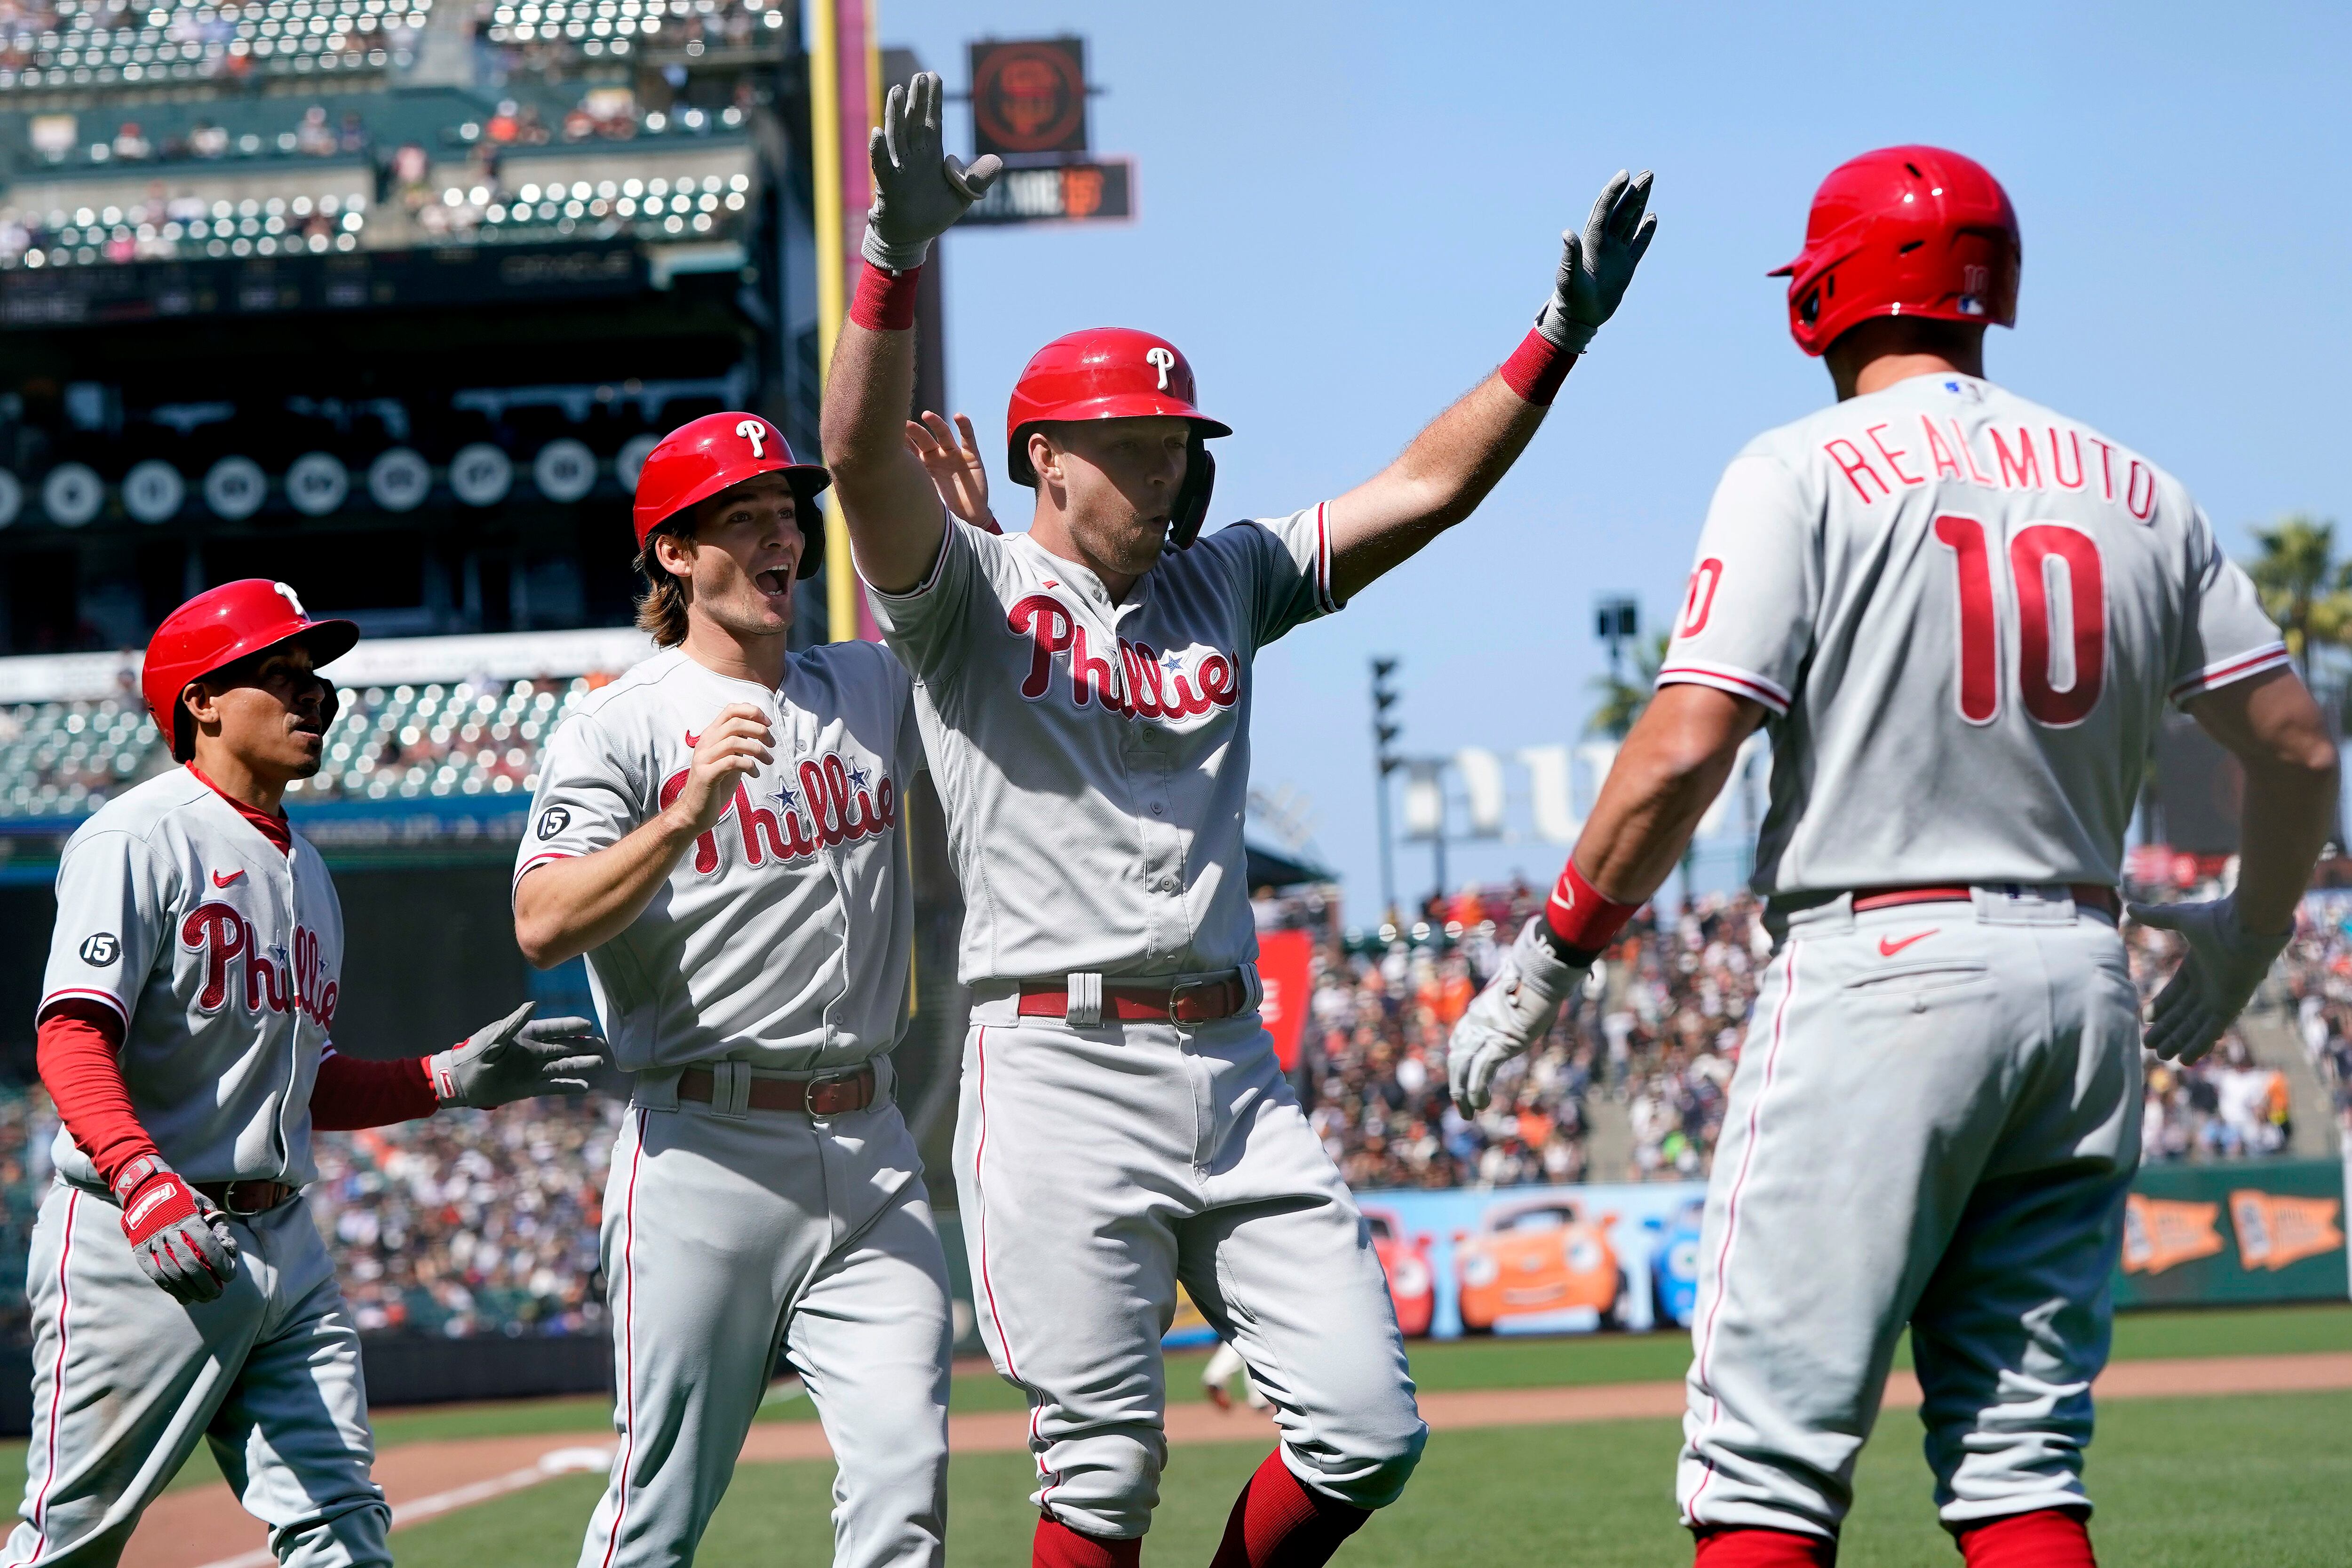 Giants' win streak snapped by 13-6 loss as Phillies break out the lumber